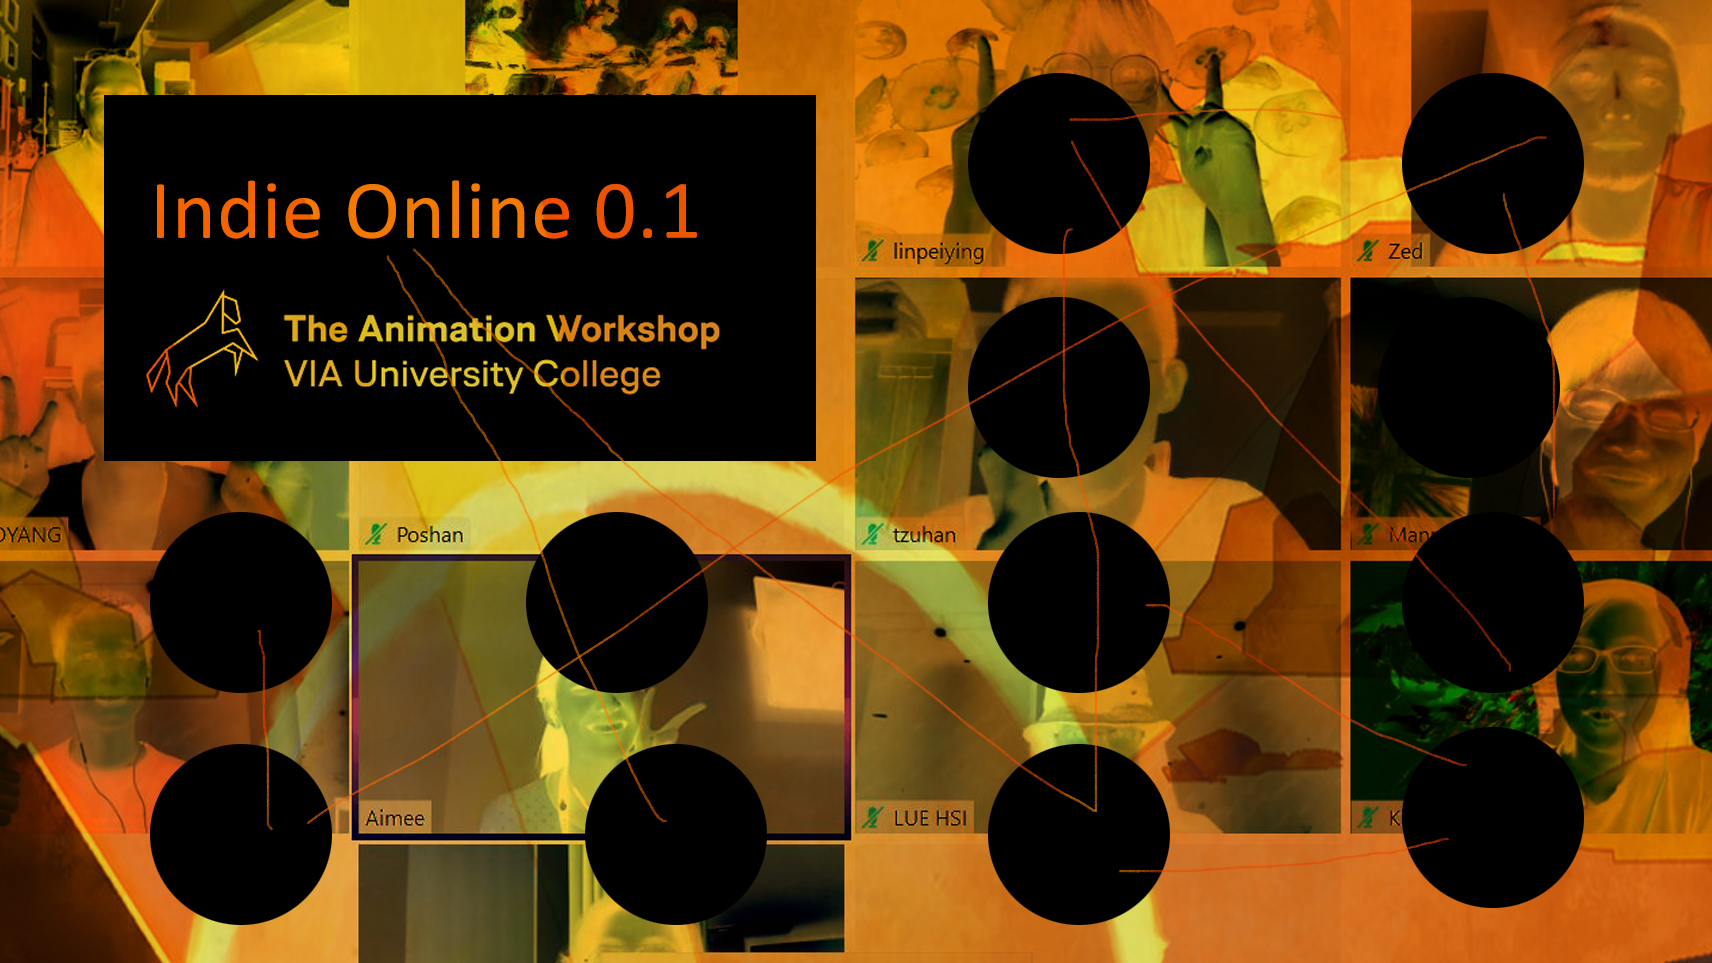 Indie Online. Adapting to New Online Platforms: A Focus on Independent Animation  Project Development, Distribution and Training | animationstudies 